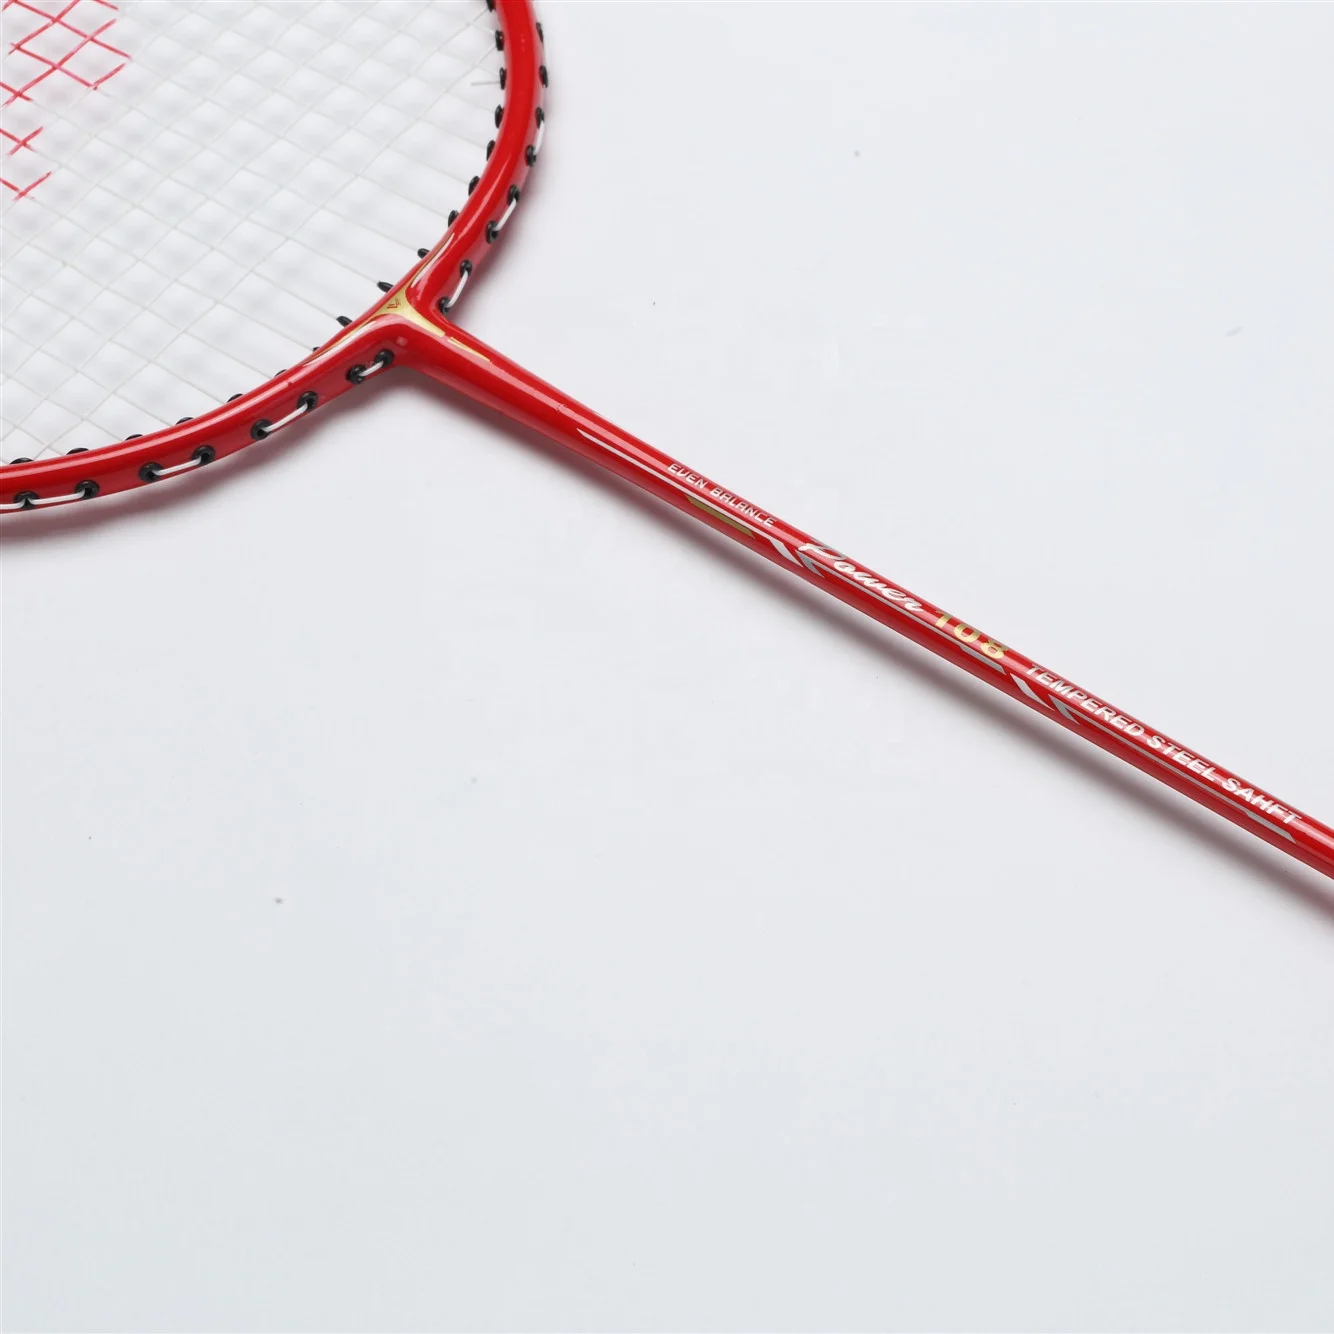 Wellcold low price professional high pound badminton racket set for sale